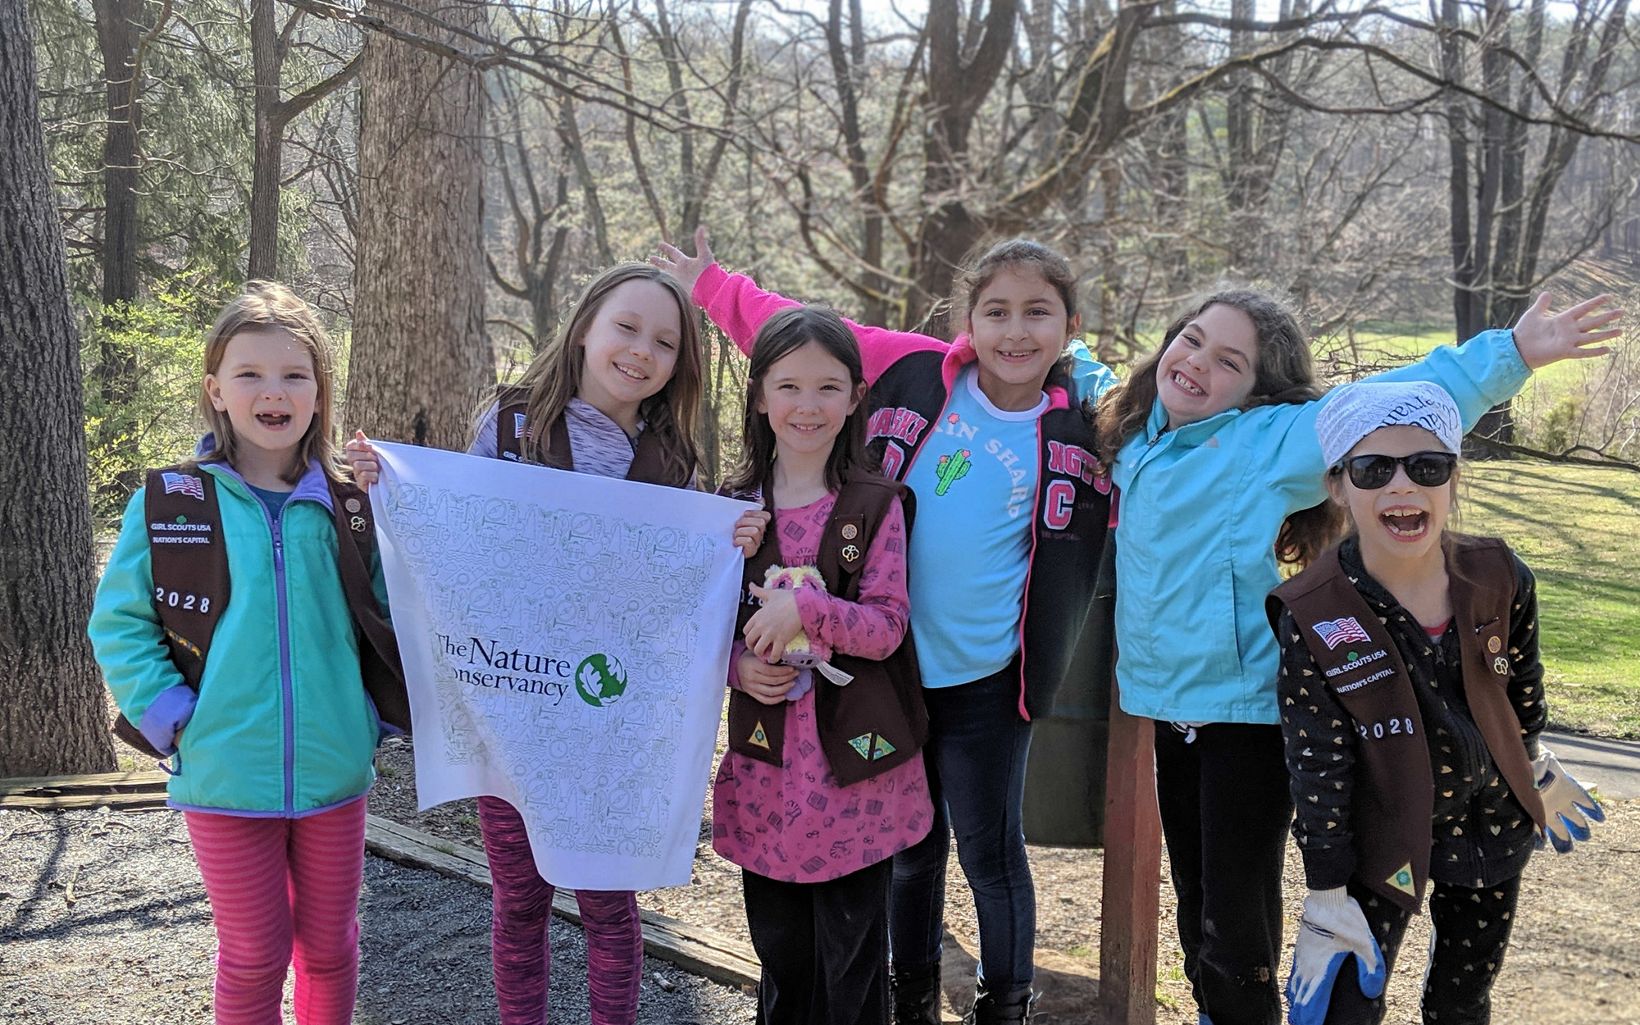 A smiling group of Brownie scouts. Six girls standing together in front of a grove of trees.